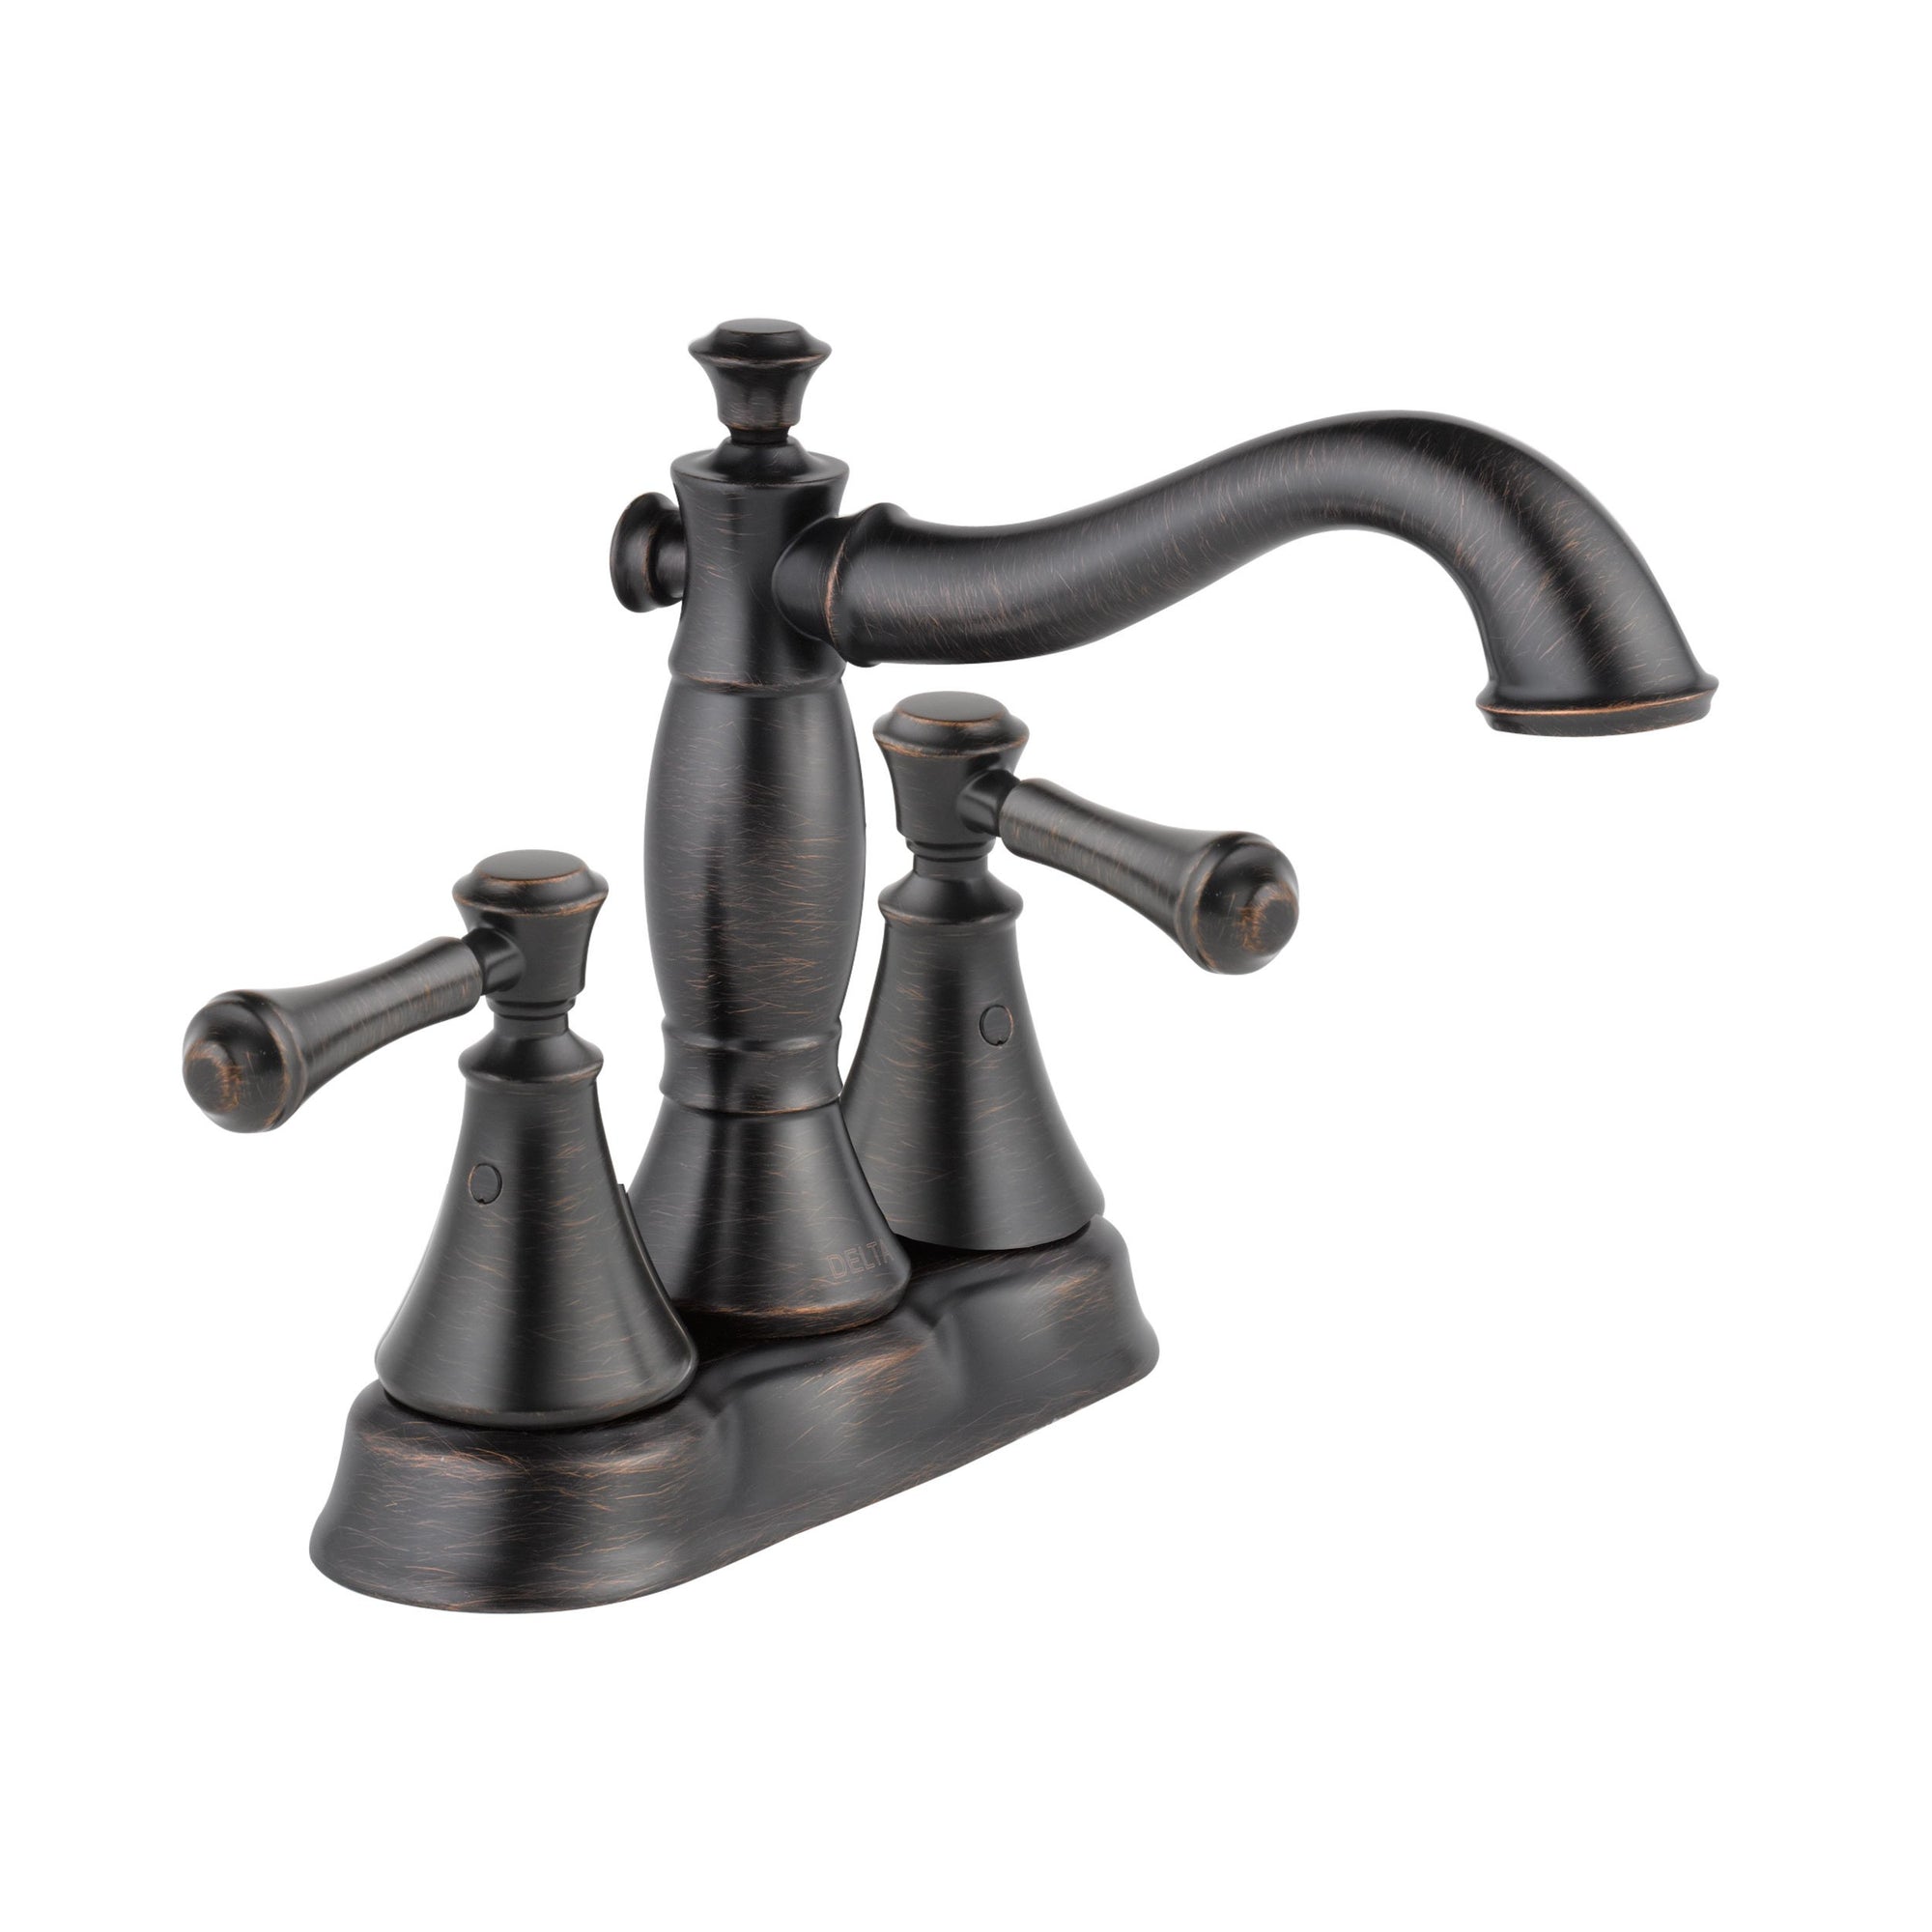 Delta Cassidy Collection Venetian Bronze Finish 4" Centerset Lavatory Bathroom Faucet INCLUDES Two Lever Handles and Metal Pop-Up Drain D1802V